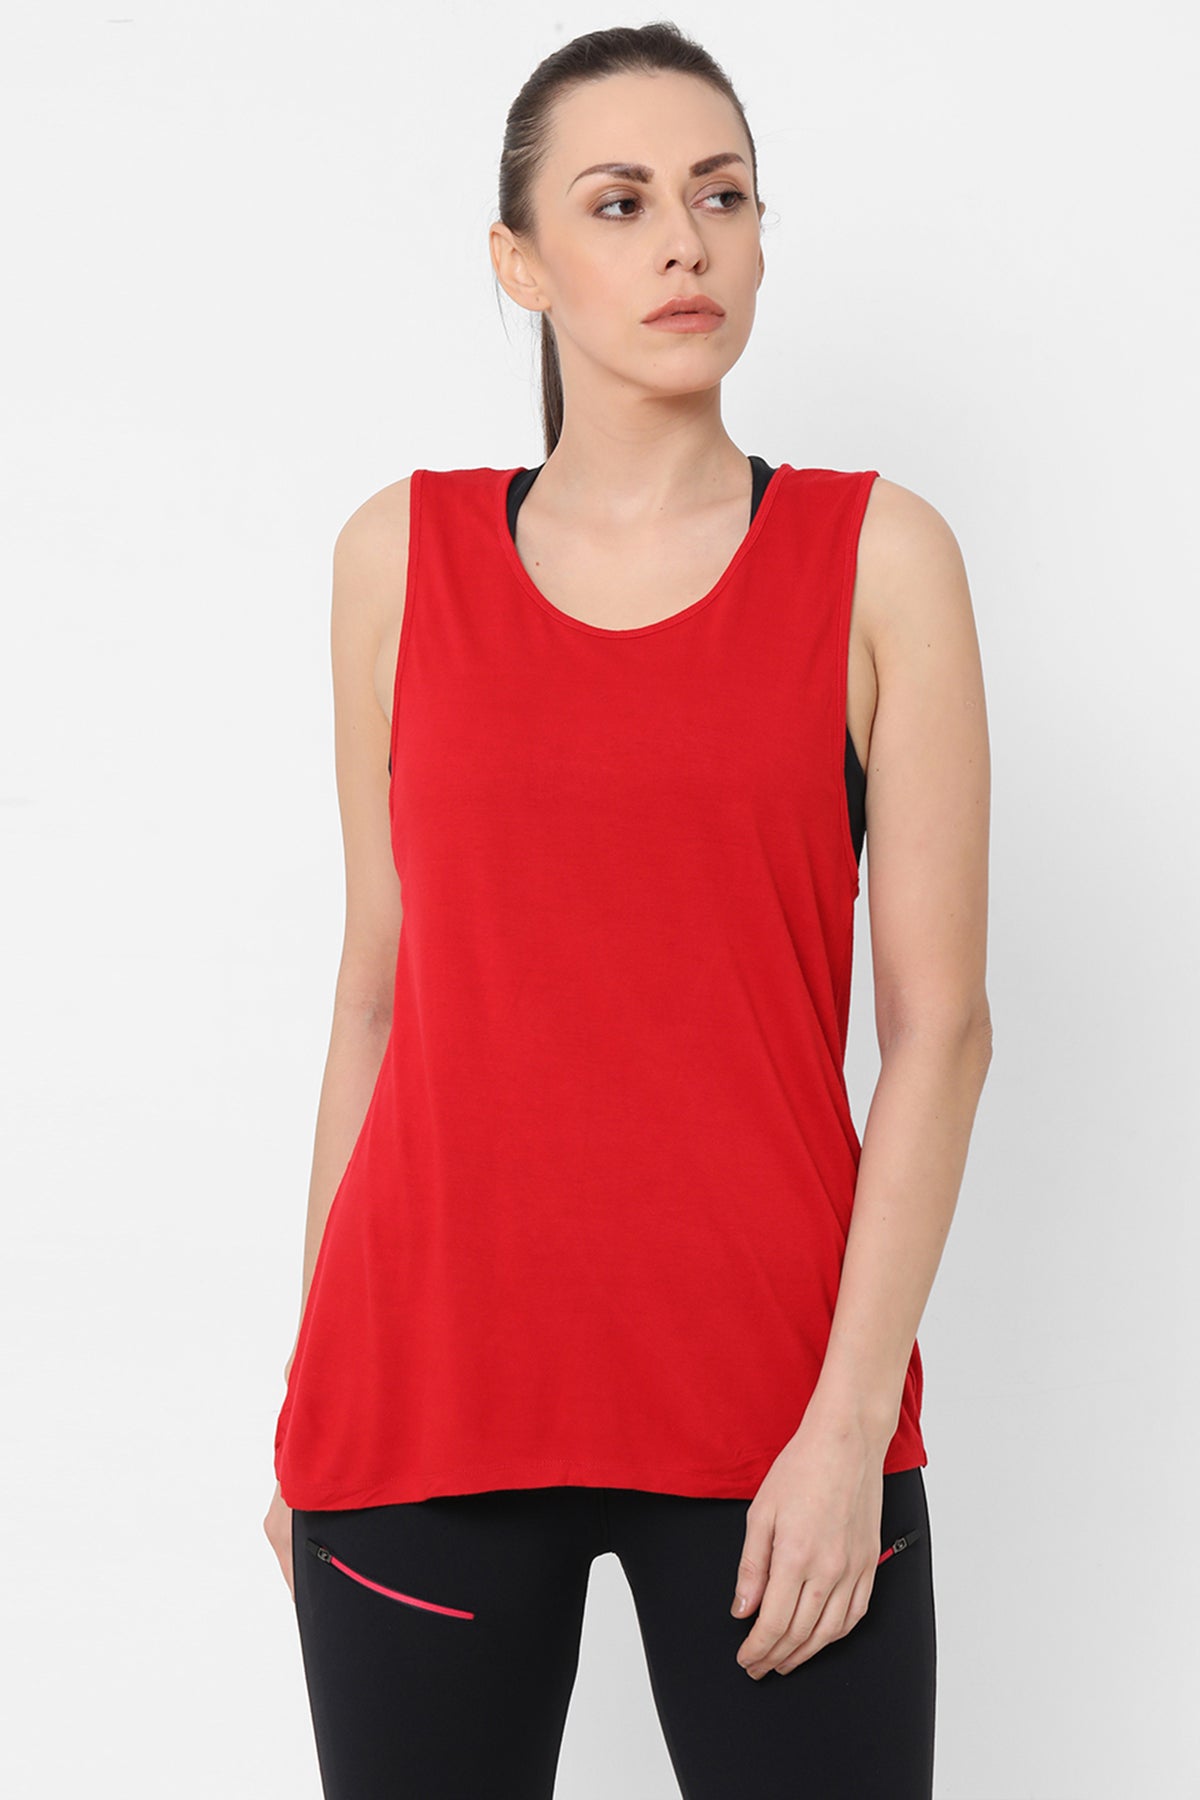 Red Tank Top With Overlap Back